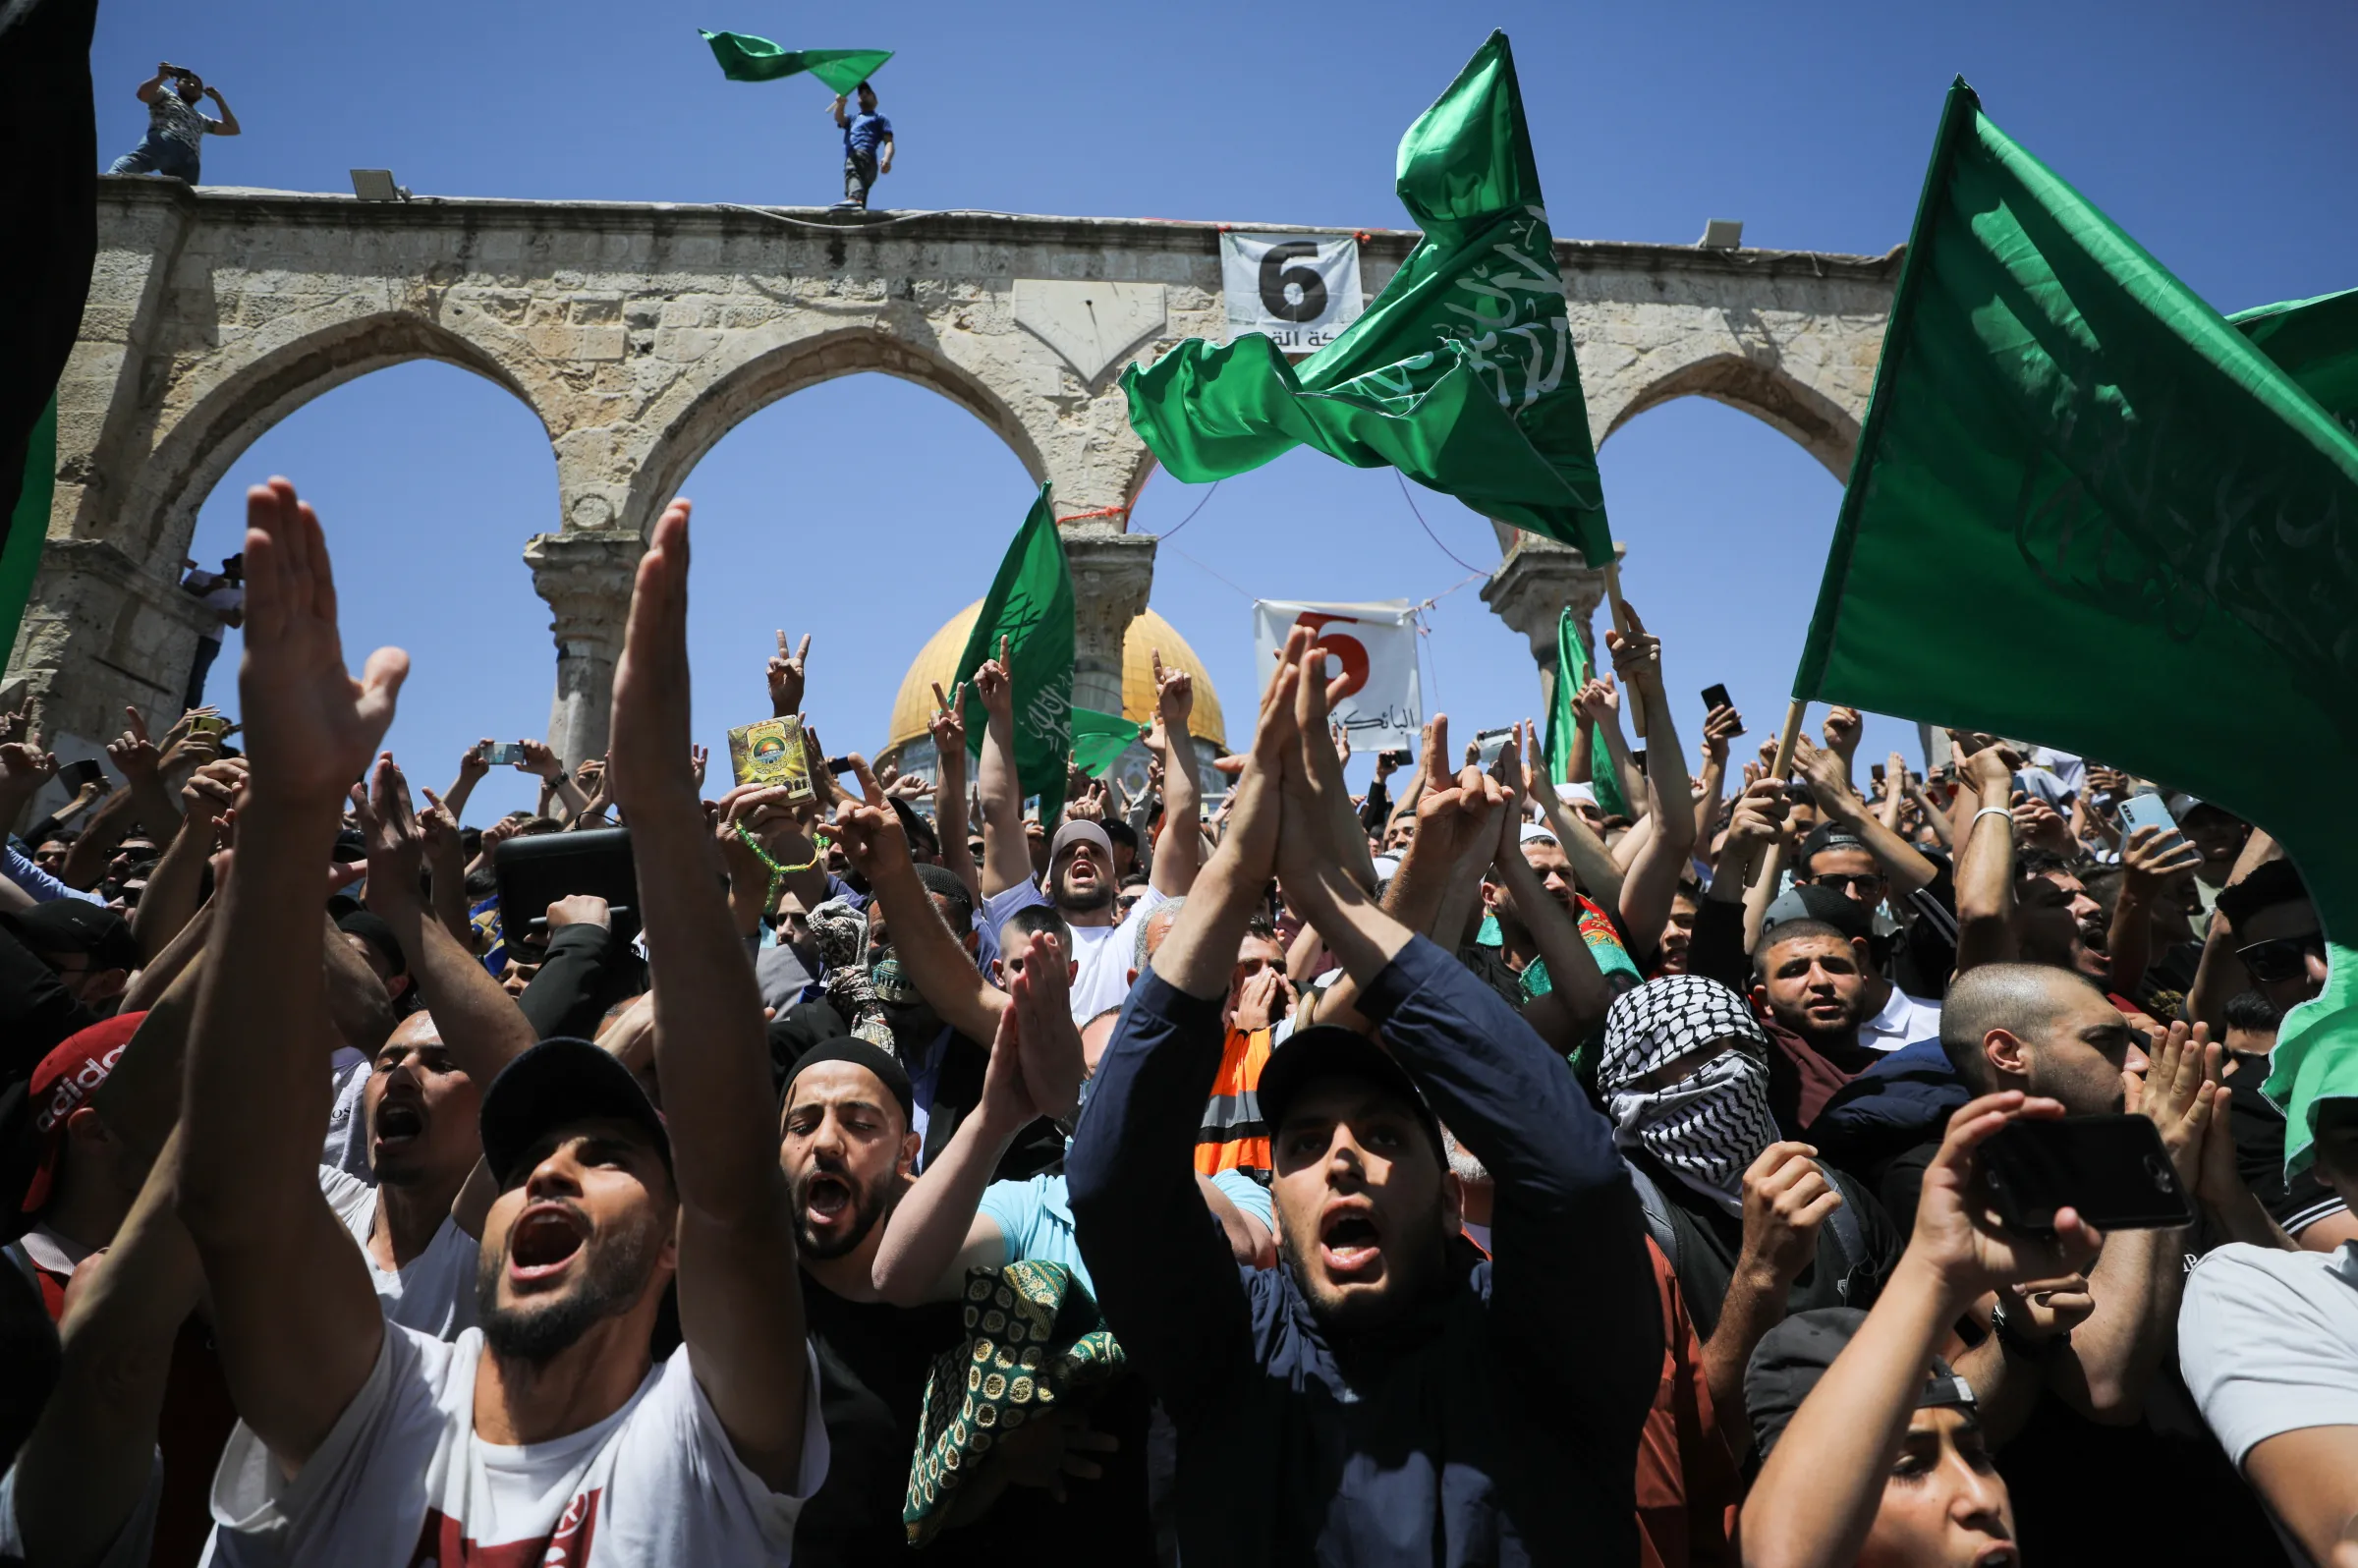 People hold Hamas flags as Palestinians gather after performing the last Friday of Ramadan to protest over the possible eviction of several Palestinian families from homes on land claimed by Jewish settlers in the Sheikh Jarrah neighbourhood, in Jerusalem's Old City, May 7, 2021. REUTERS/Ammar Awad